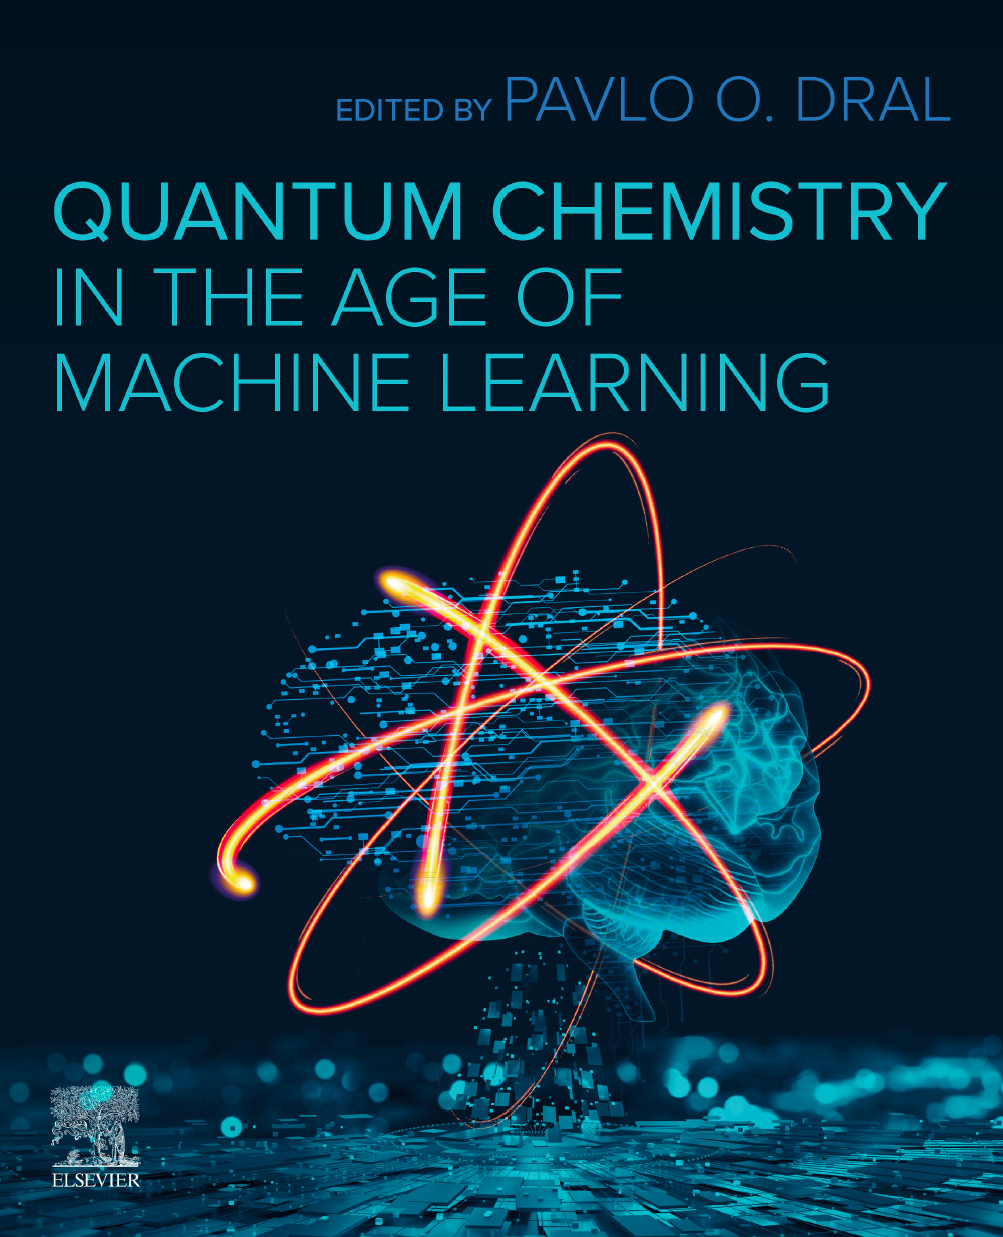 Book “Quantum Chemistry in the Age of Machine Learning”